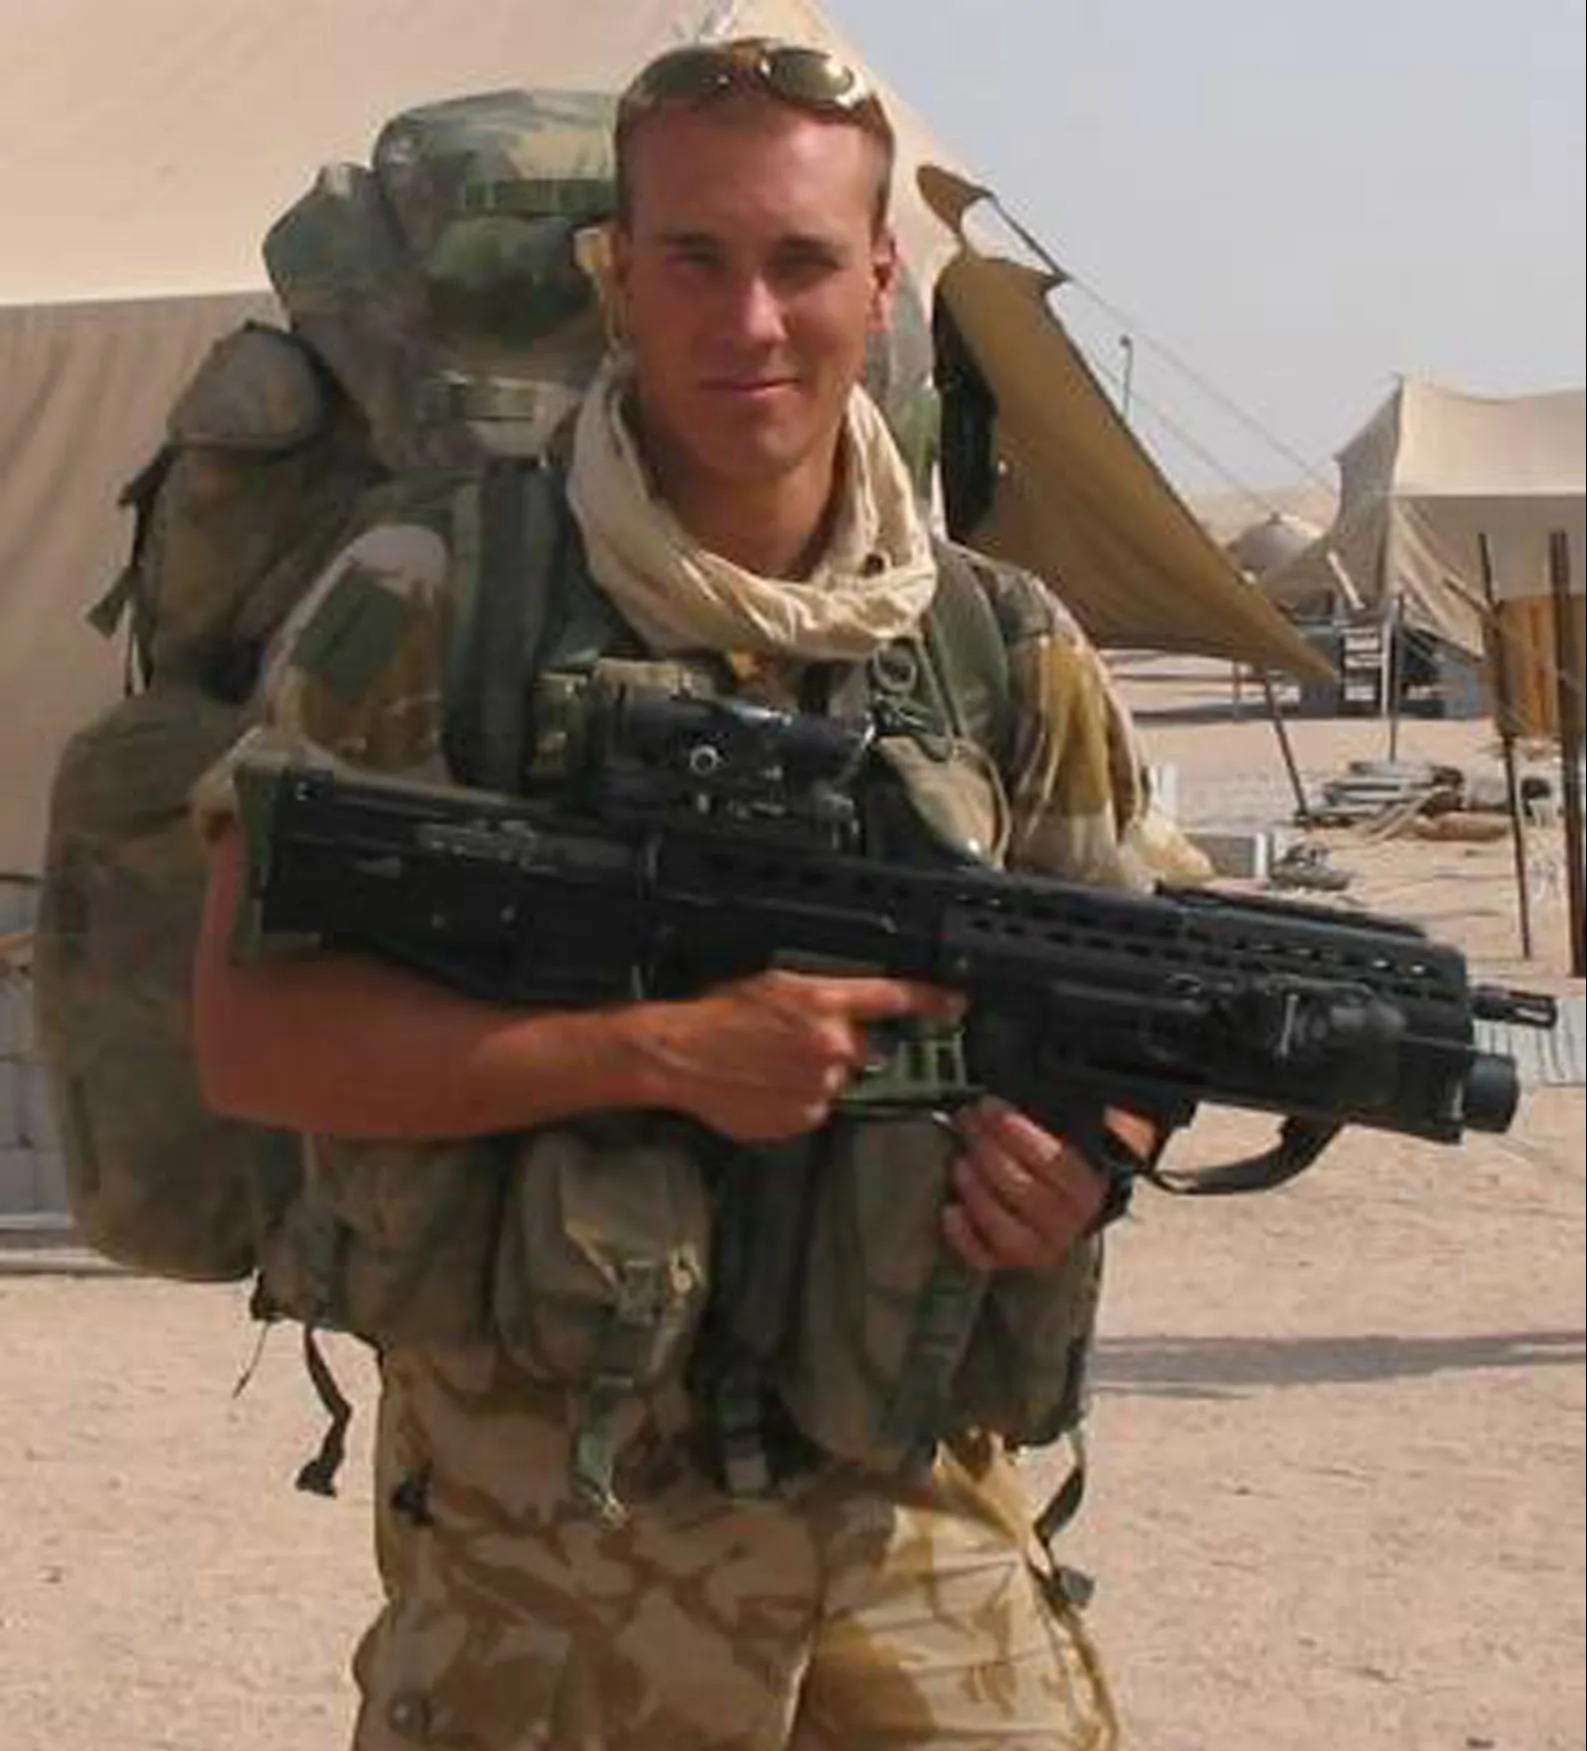 Lance corporal Matthew Croucher saved his colleagures by diving in front of a grenade qhidqxiqzdiqreinv